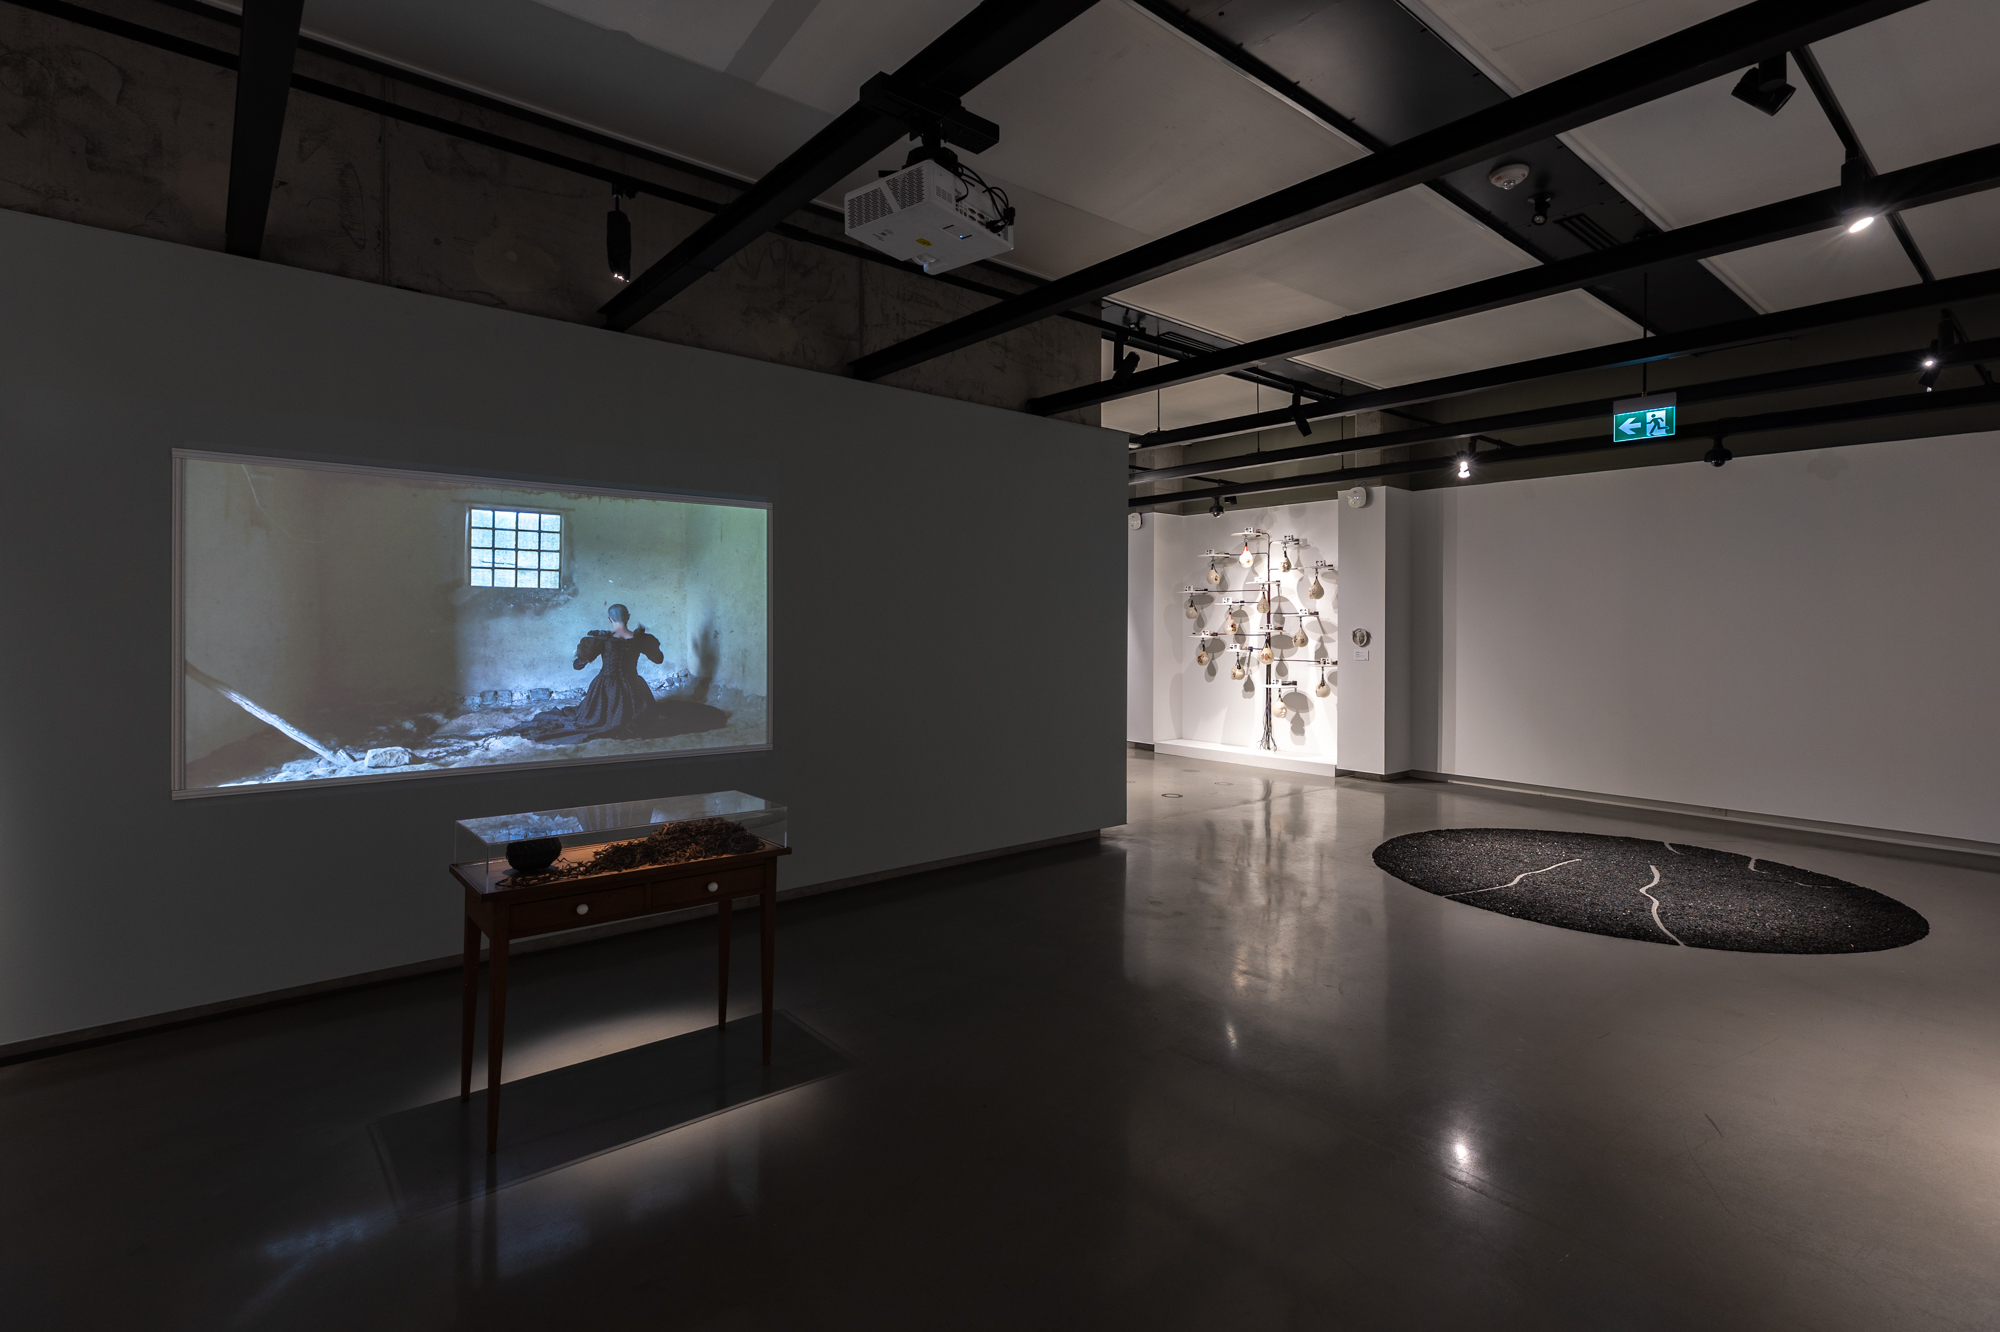 An overview of a exhibition. On the floor, there is an artwork of coal placed together as a large circle. There is a projection of a woman dressing black Victorian dress kneeling on the floor while weaving hair together. In front of the projection, there is display case of hair skein. On the wall, there is a multiple ceramic punching bags mounted.  